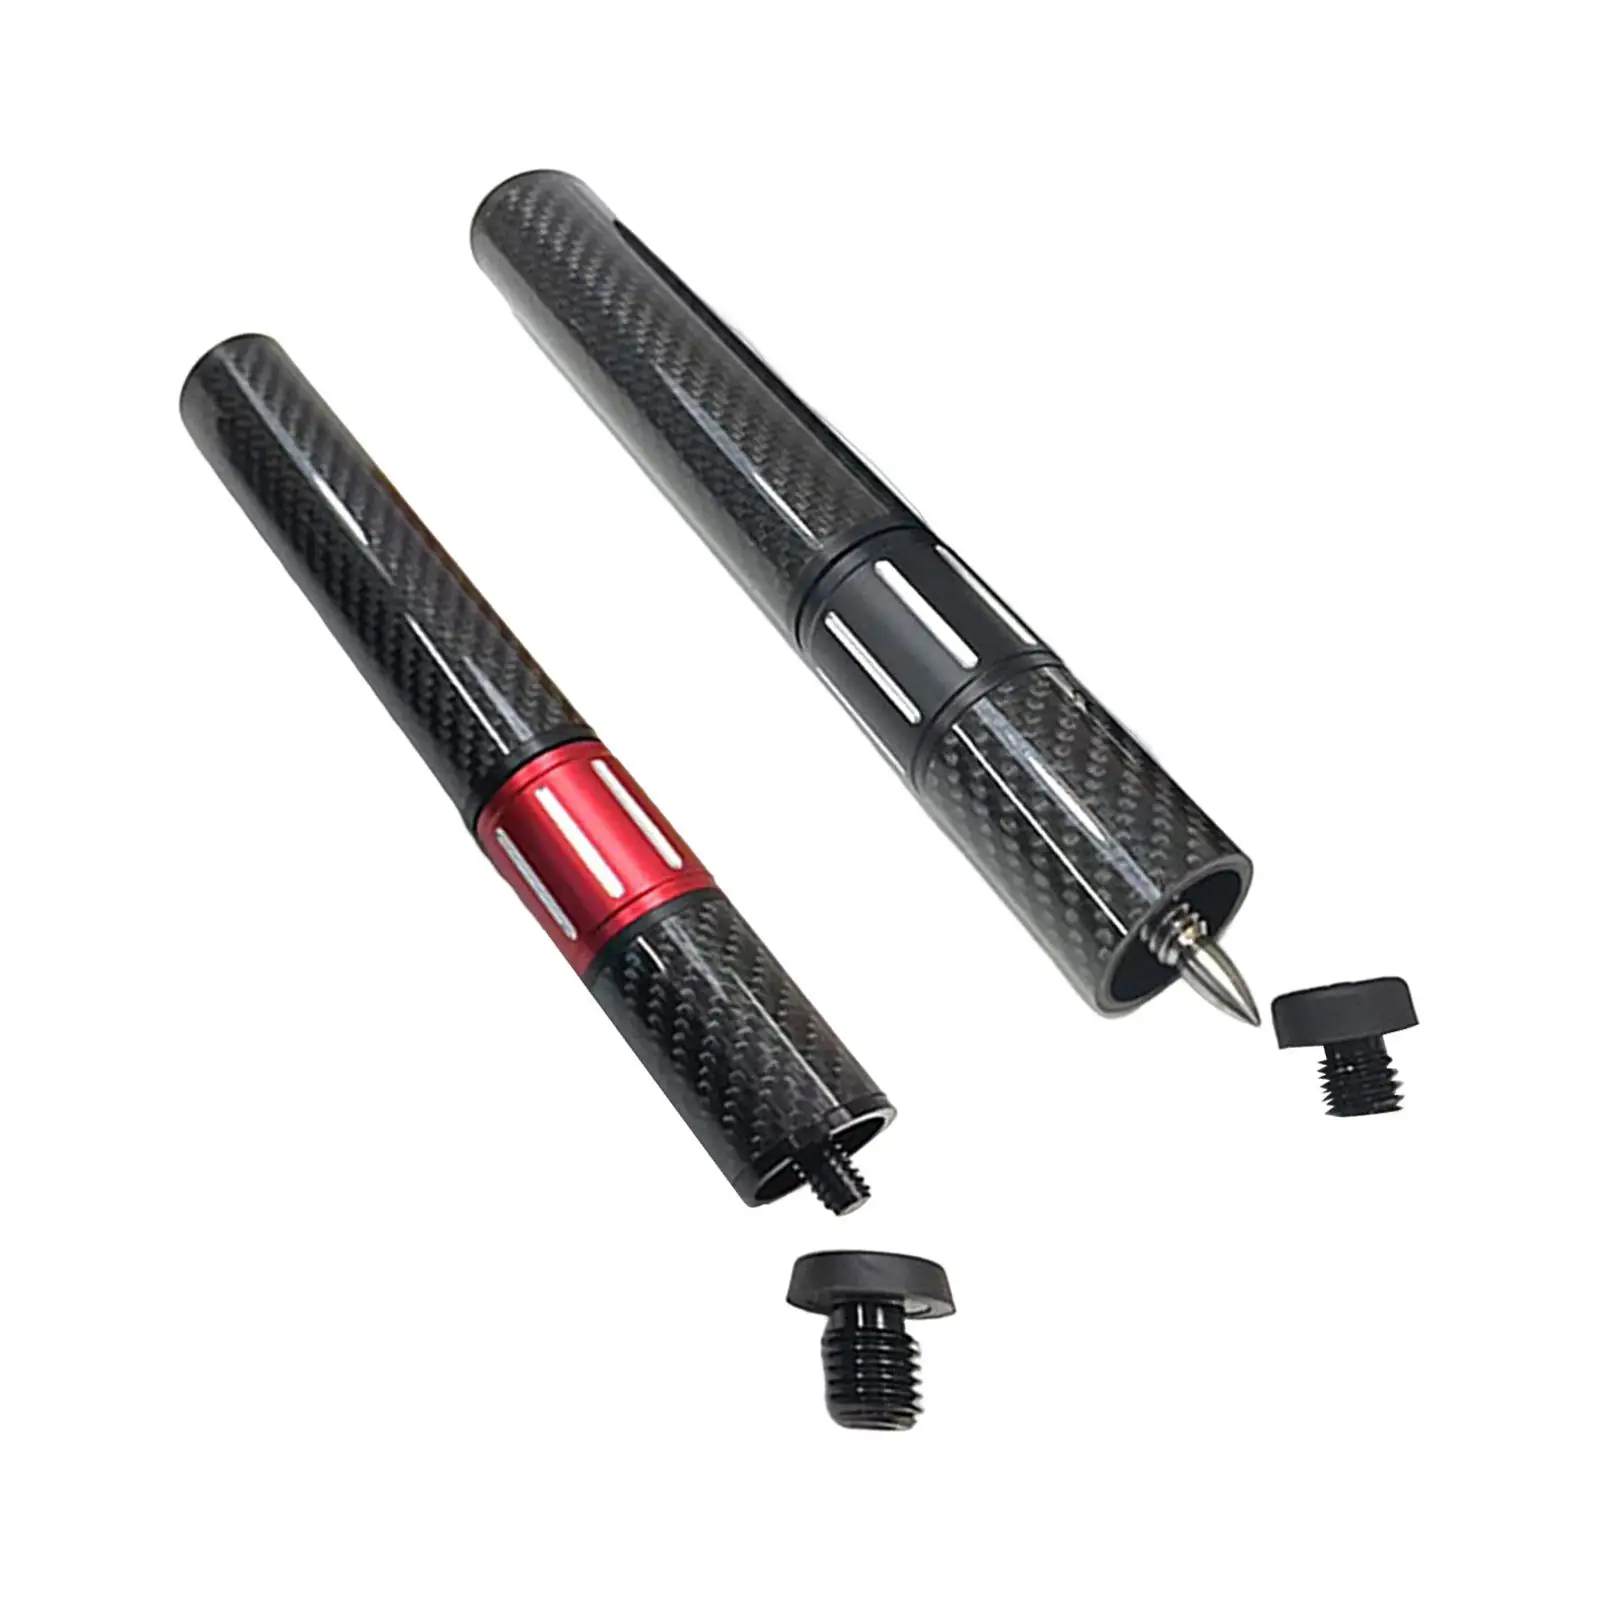 Telescopic Pool Cue Extension Cue End Lengthener Billiards Accessories Snooker Cue Extend for Professional Beginners Enthusiast